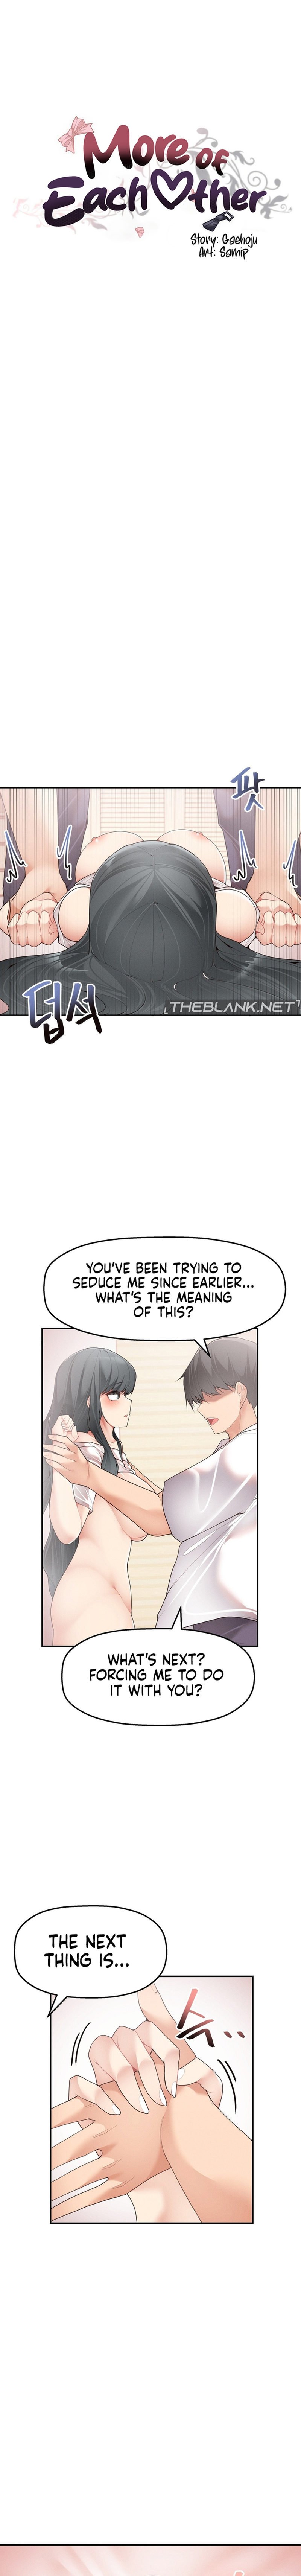 more-than-each-other-chap-3-1